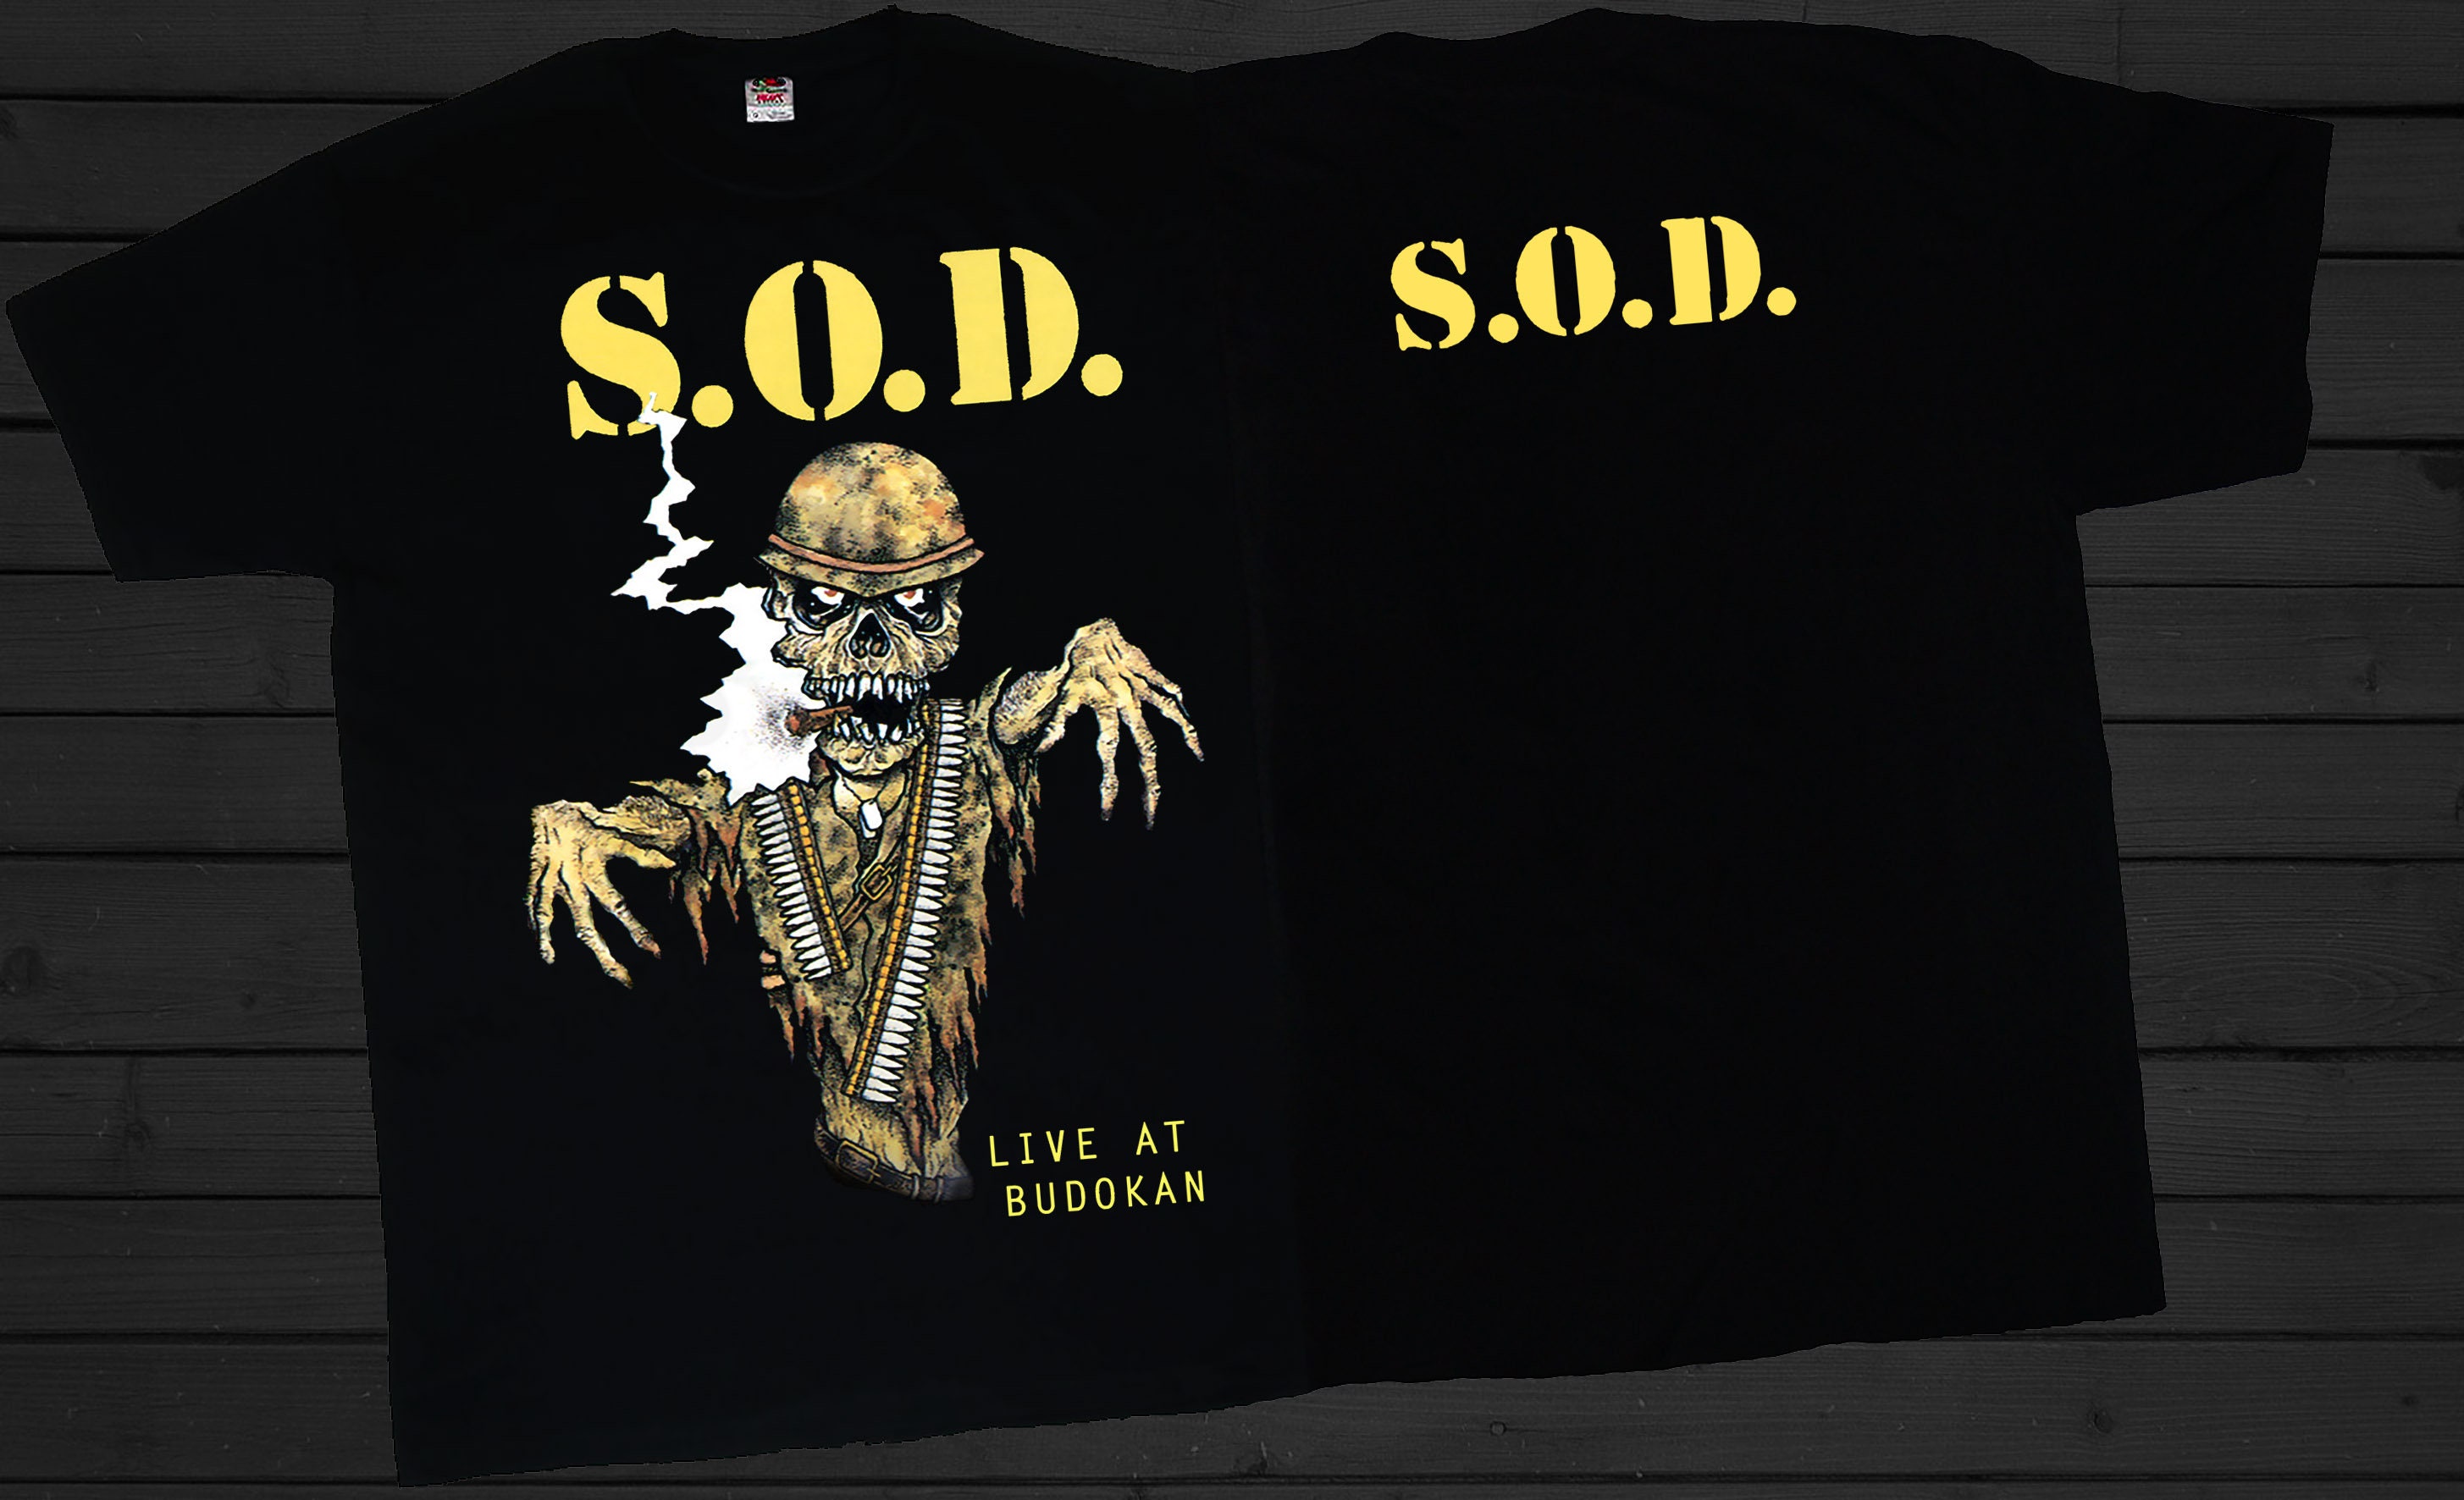 S.O.D - Stormtroopers of Death - Live at Budokan Shirt